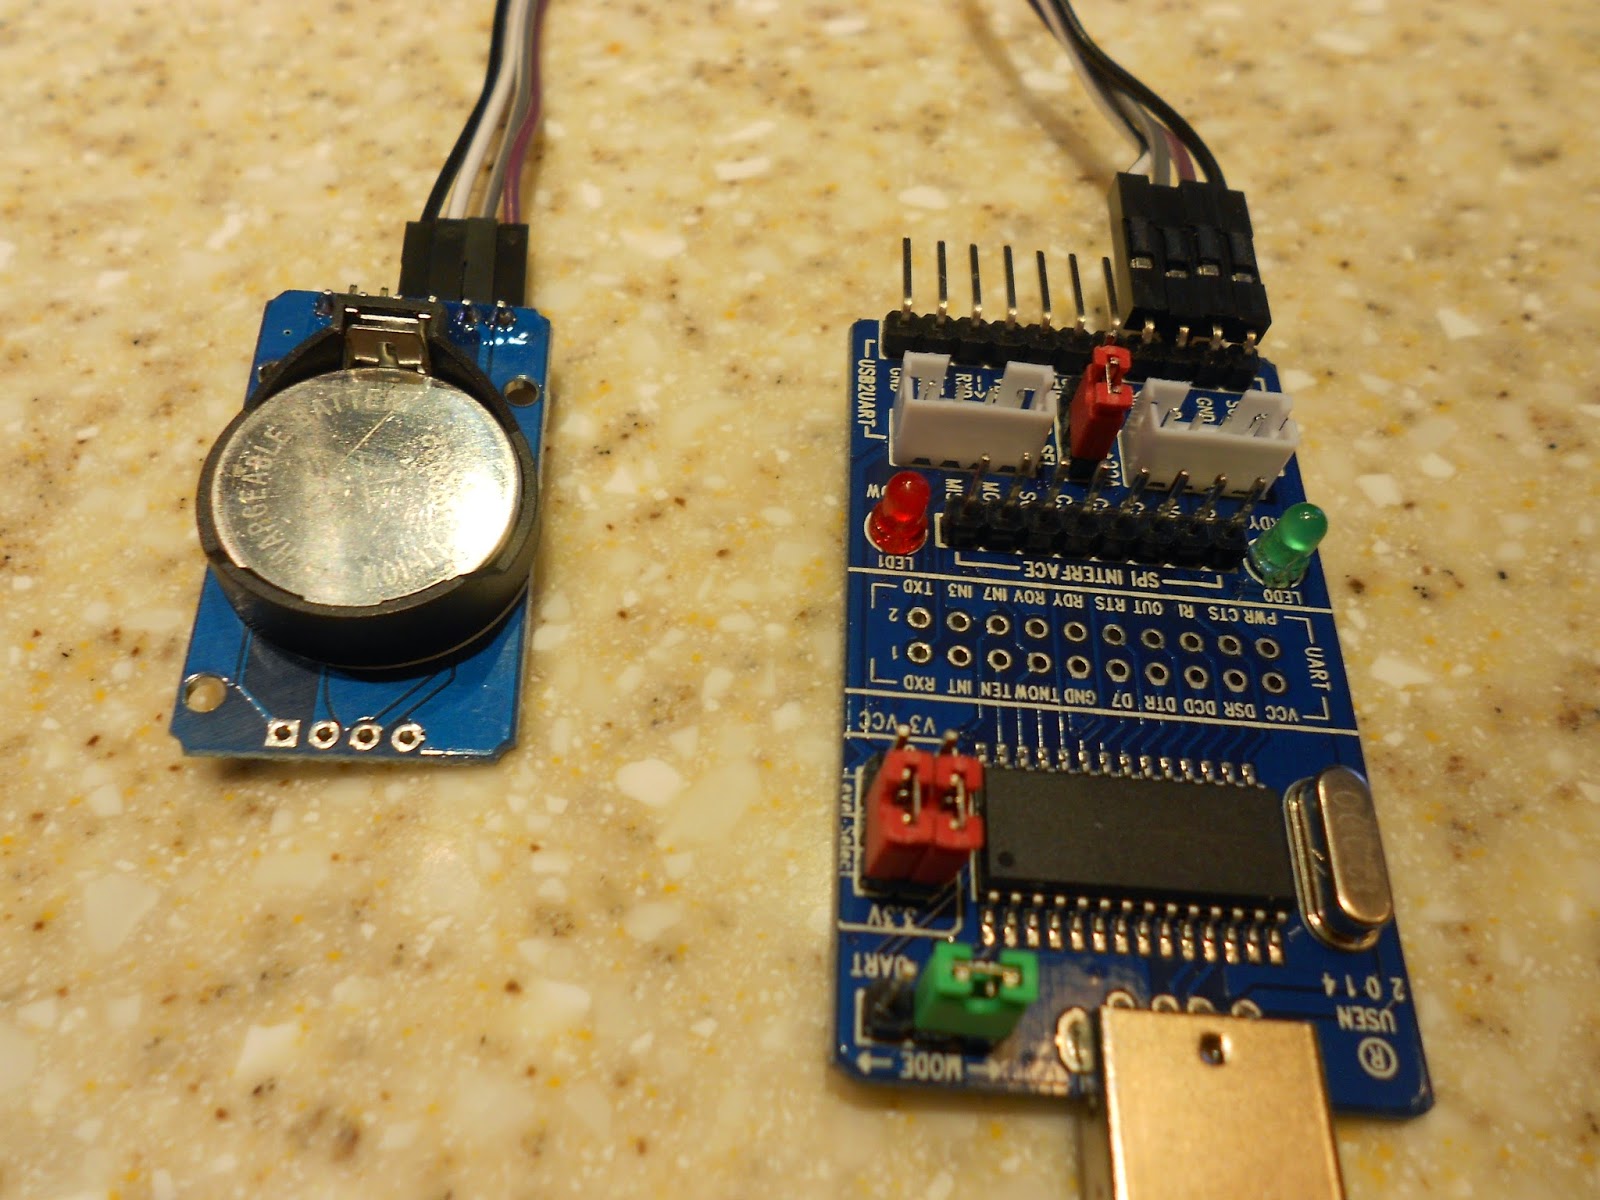 High Precision Real-Time Clock Module connected to USB 2 I2C Converter